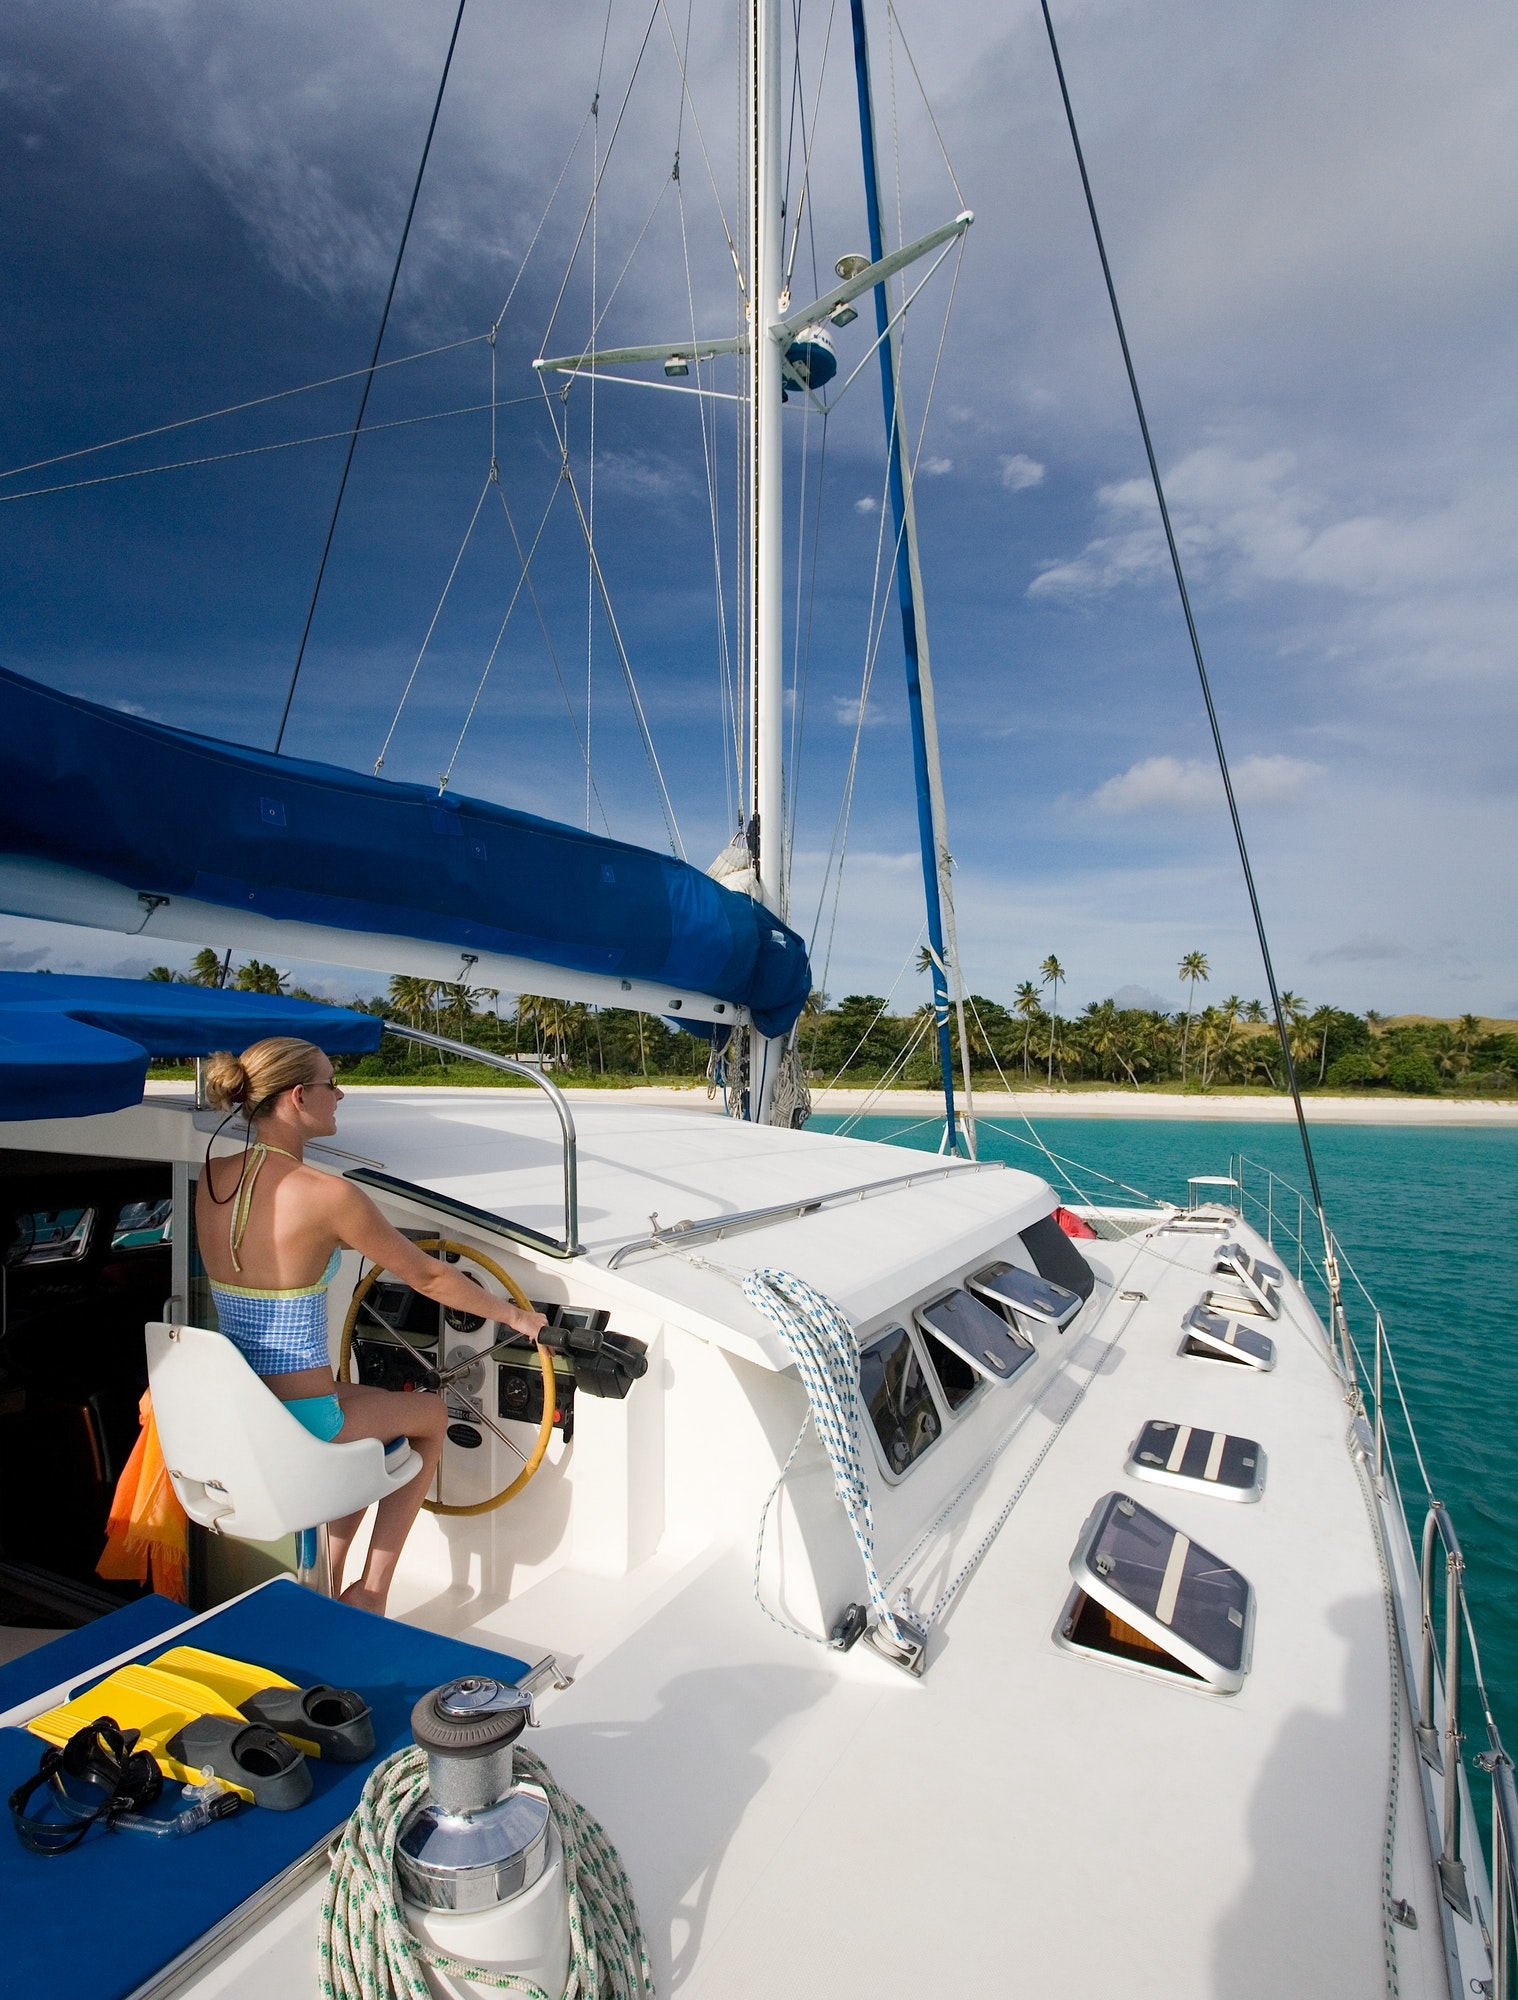 luxury-vacation-on-a-yacht-in-the-yasawa-islands-of-fiji-in-the-south-pacific-.jpg